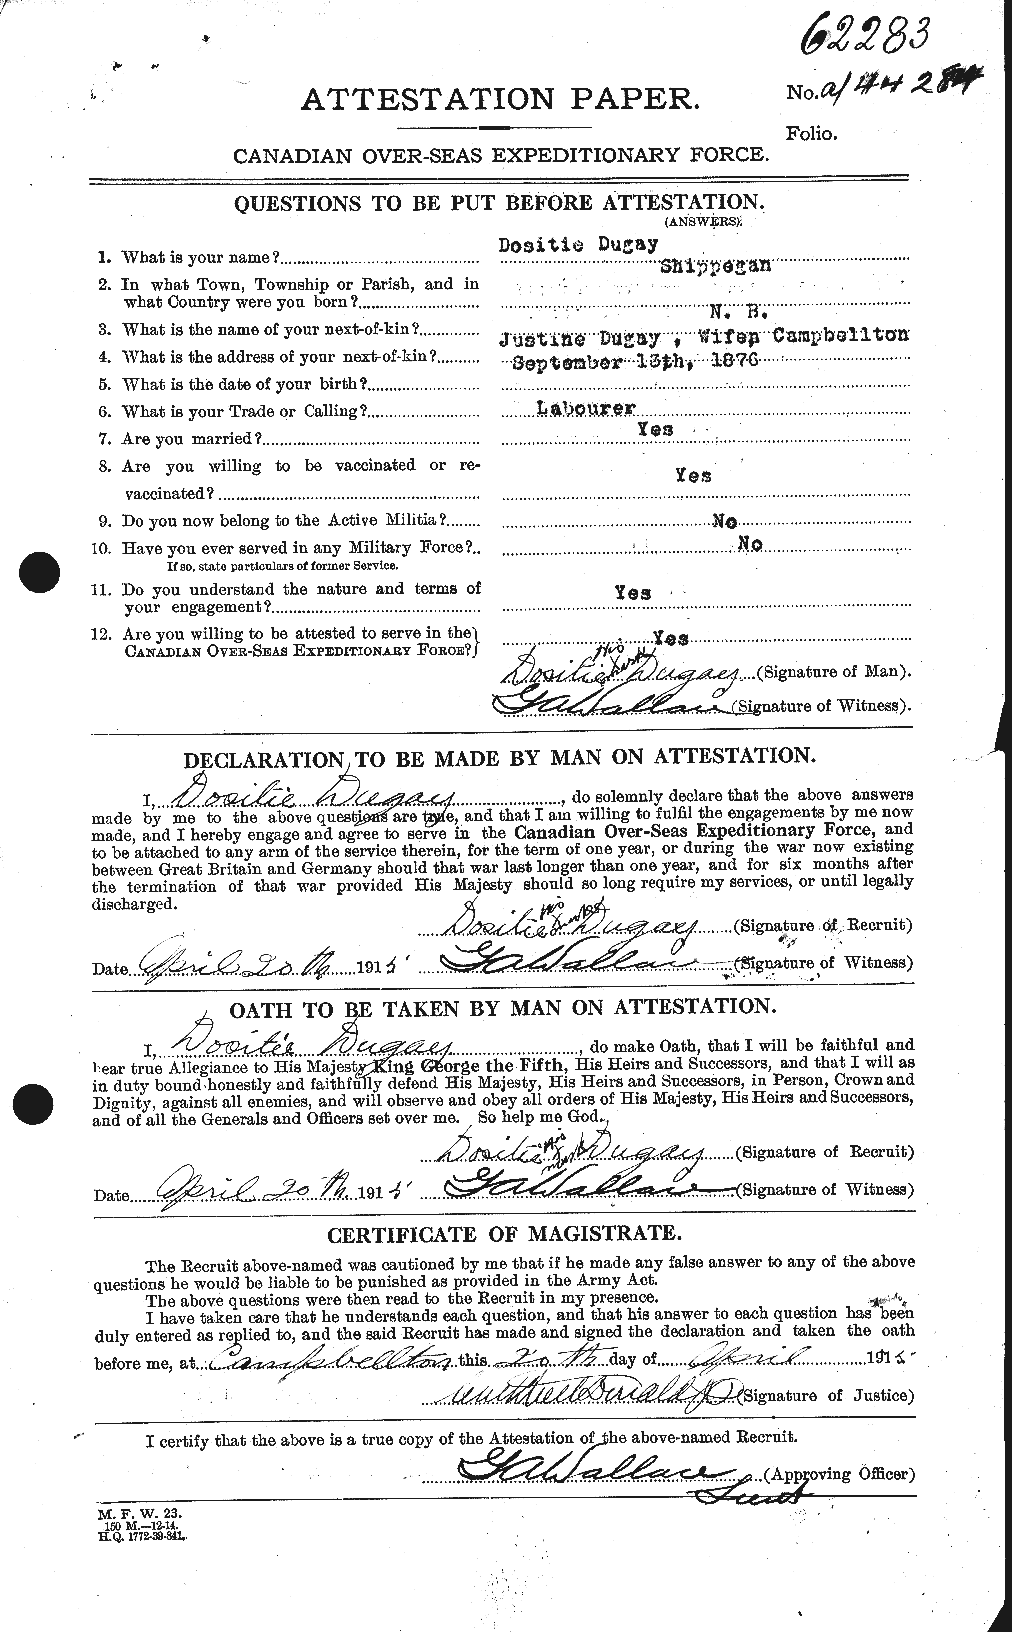 Personnel Records of the First World War - CEF 300019a